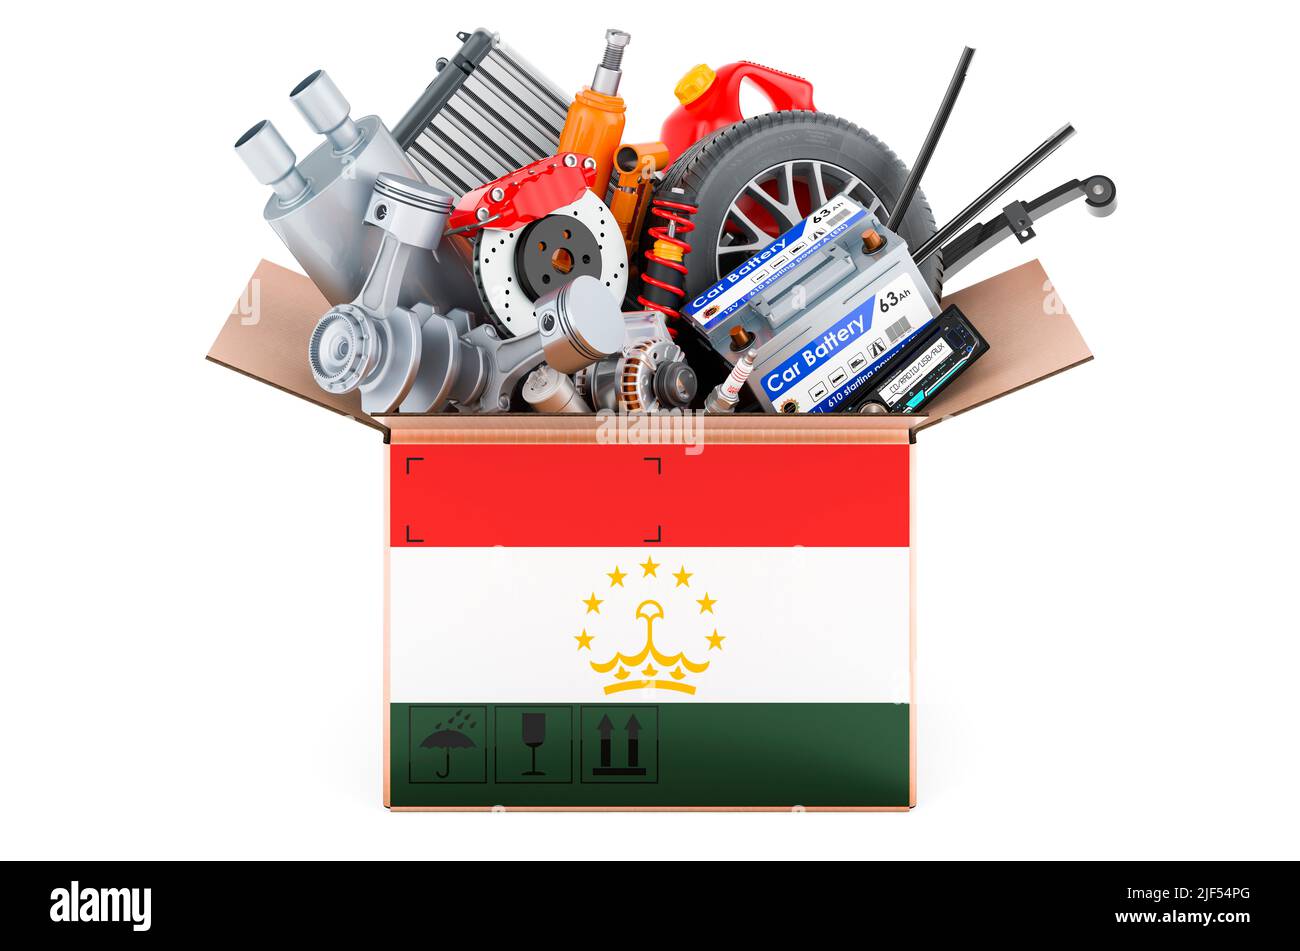 Tajik flag painted on the parcel with car parts. 3D rendering isolated on white background Stock Photo